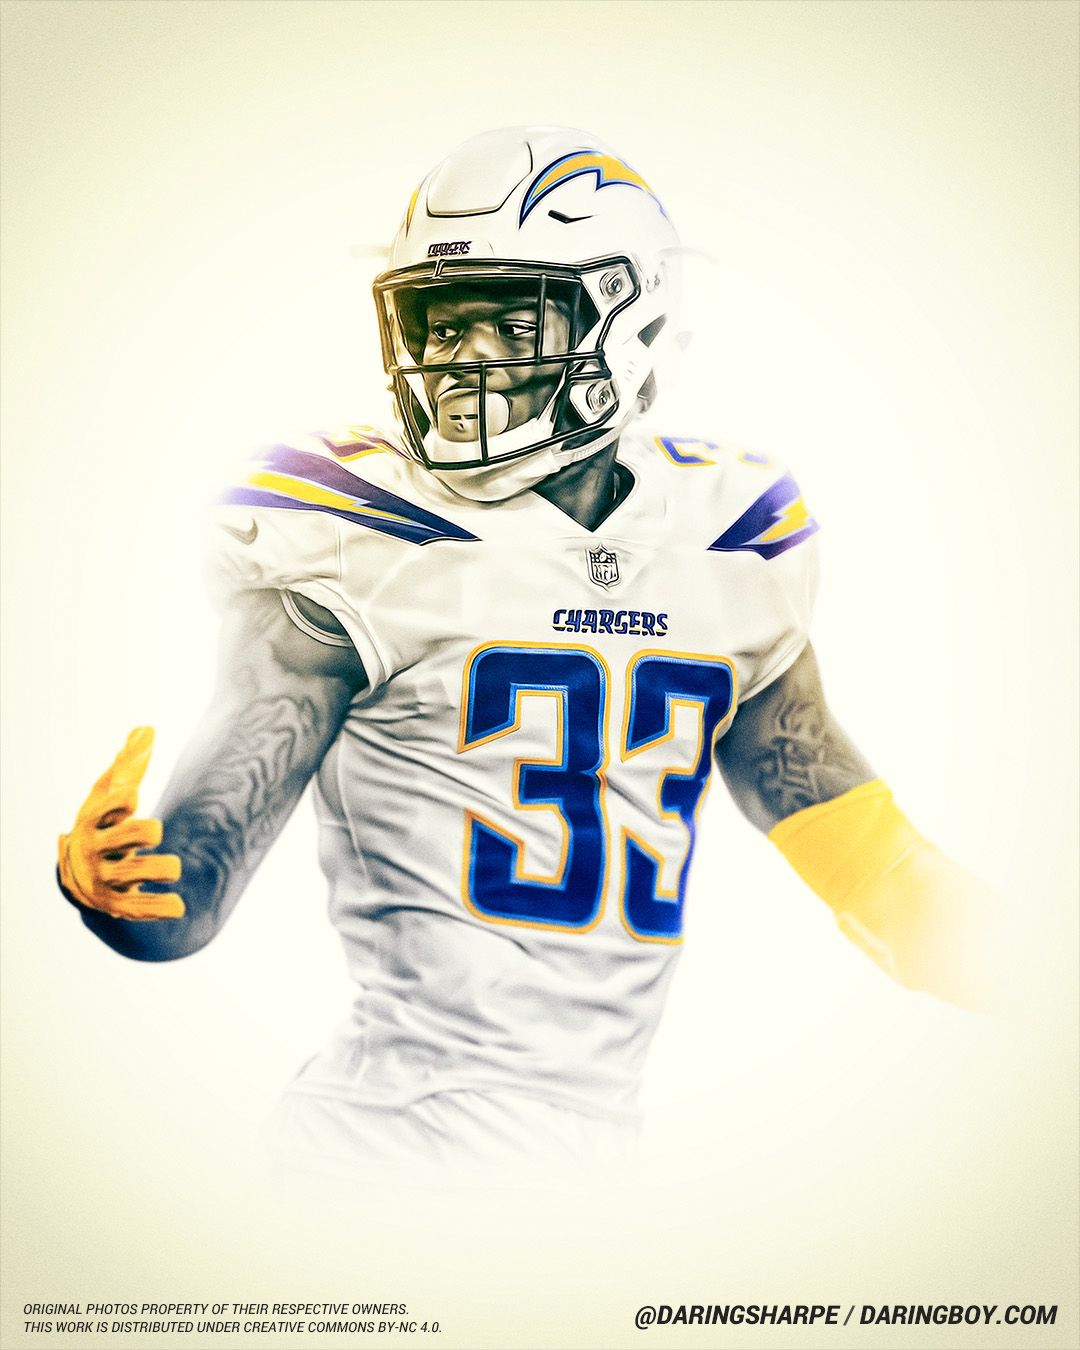 Chargers Wallpaper ideas. chargers, san diego chargers, los angeles chargers